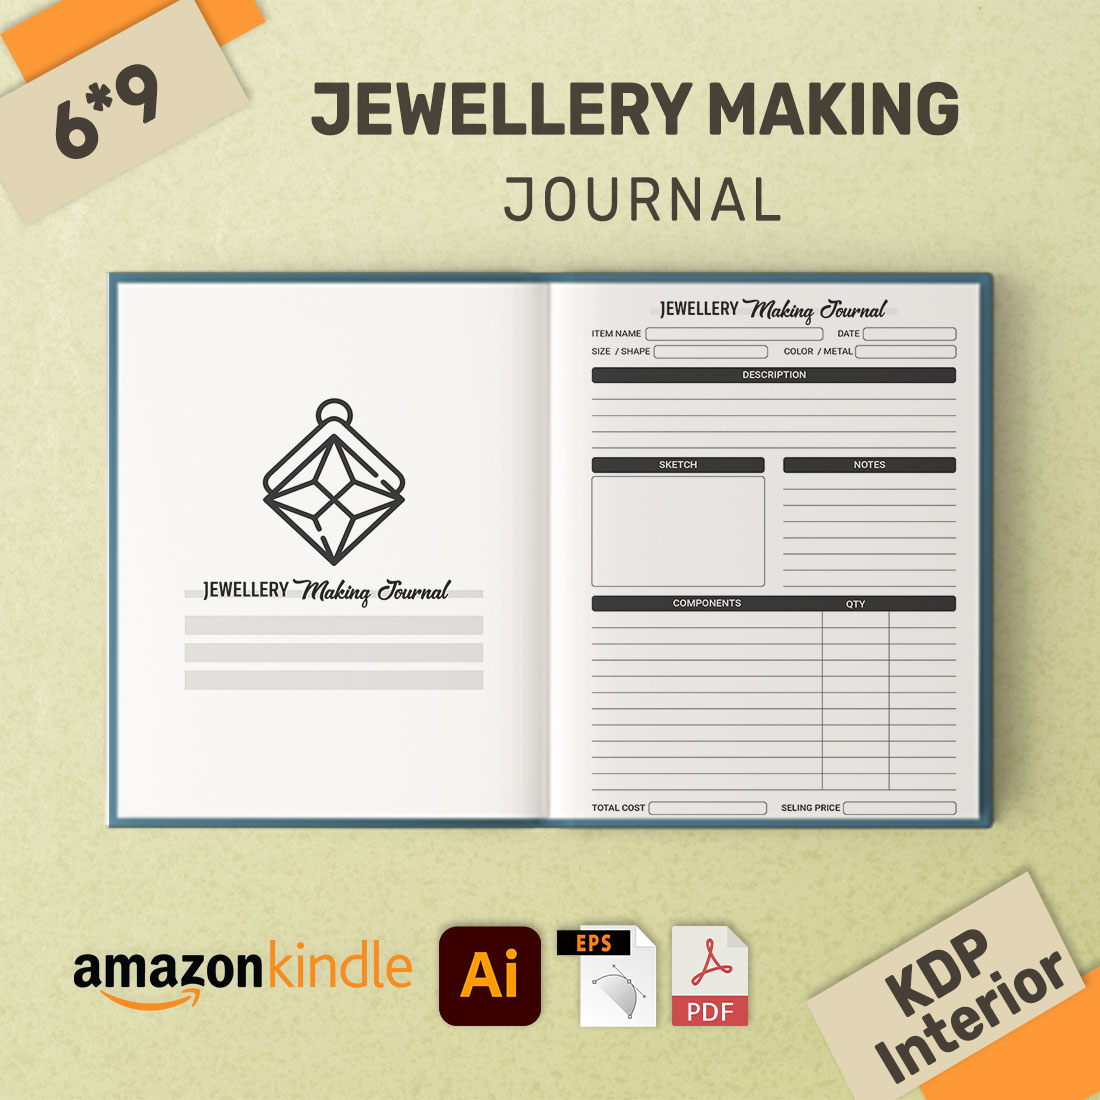 Jewellery Making Log Book Journal KDP Interior cover image.